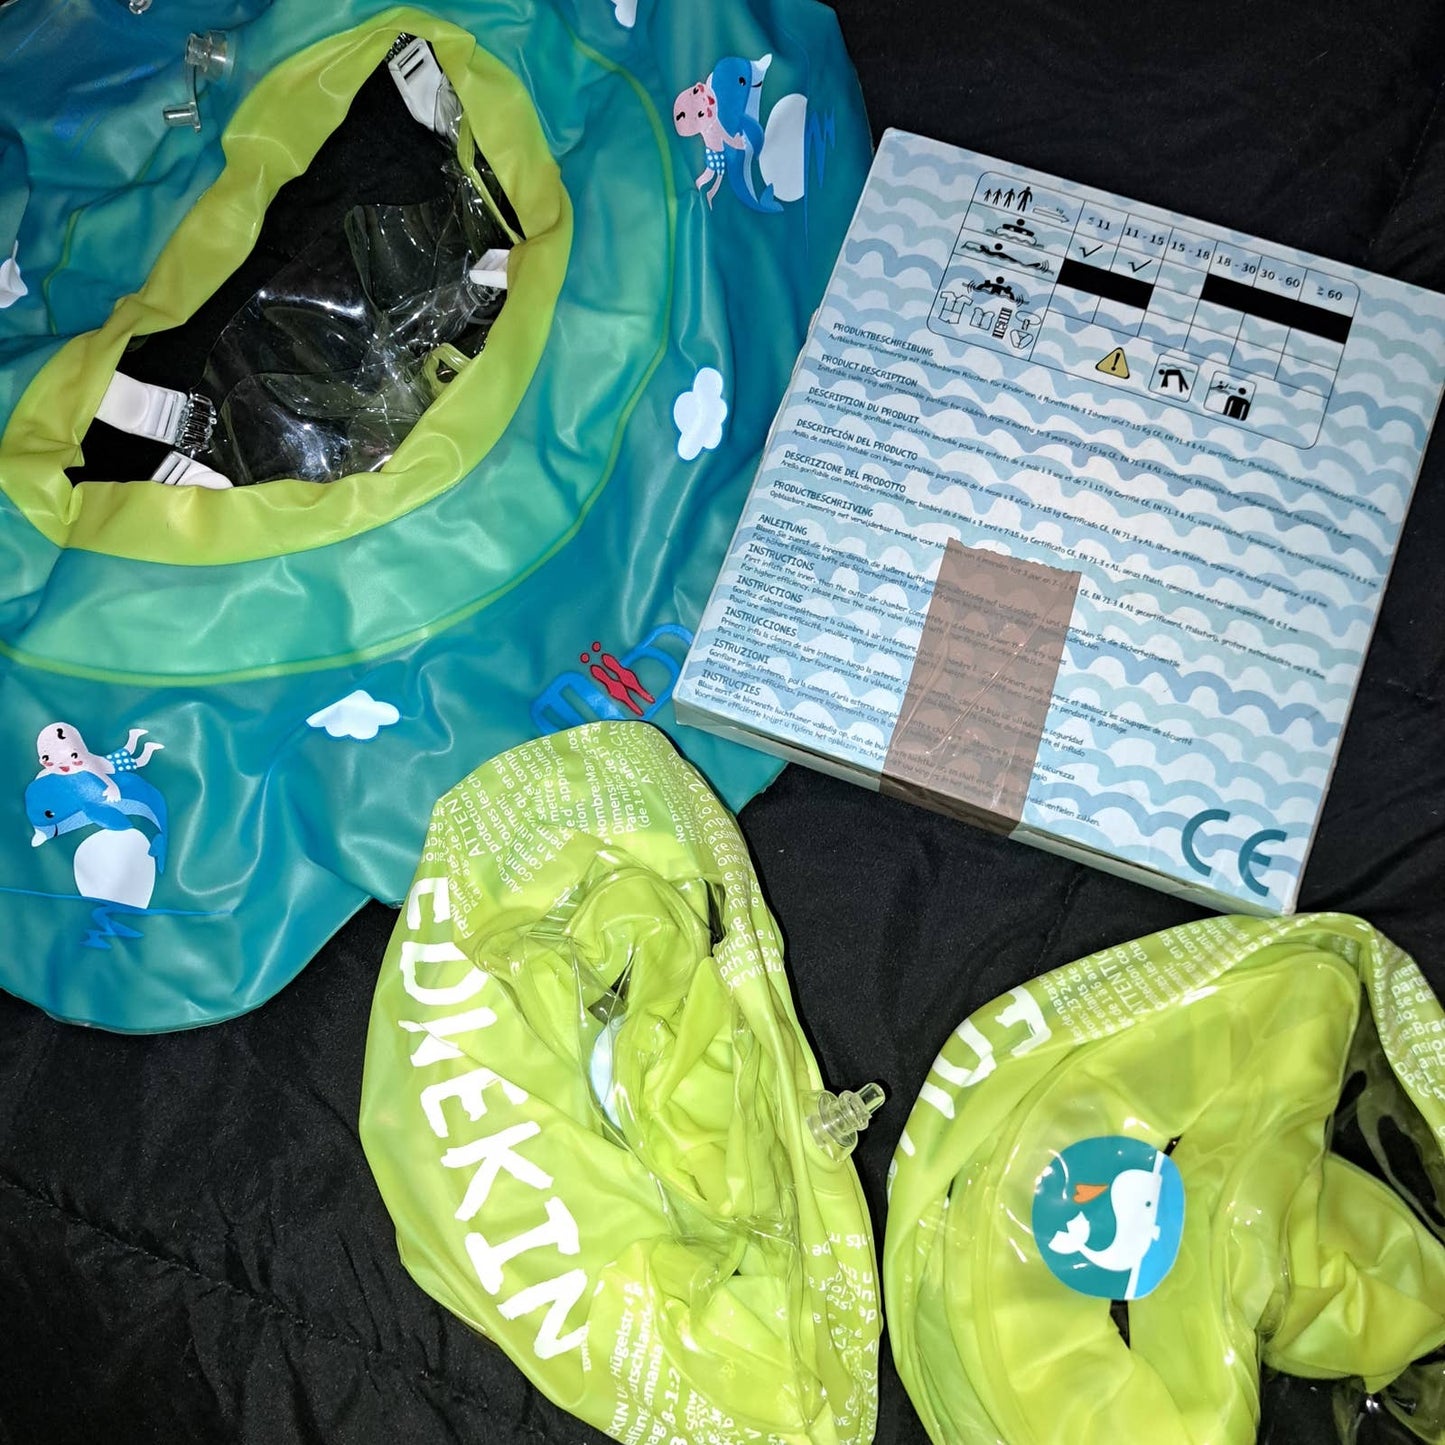 NEW - 2 Child Swimming Seat Tubes PLUS 1 set Arm Floaties with pump